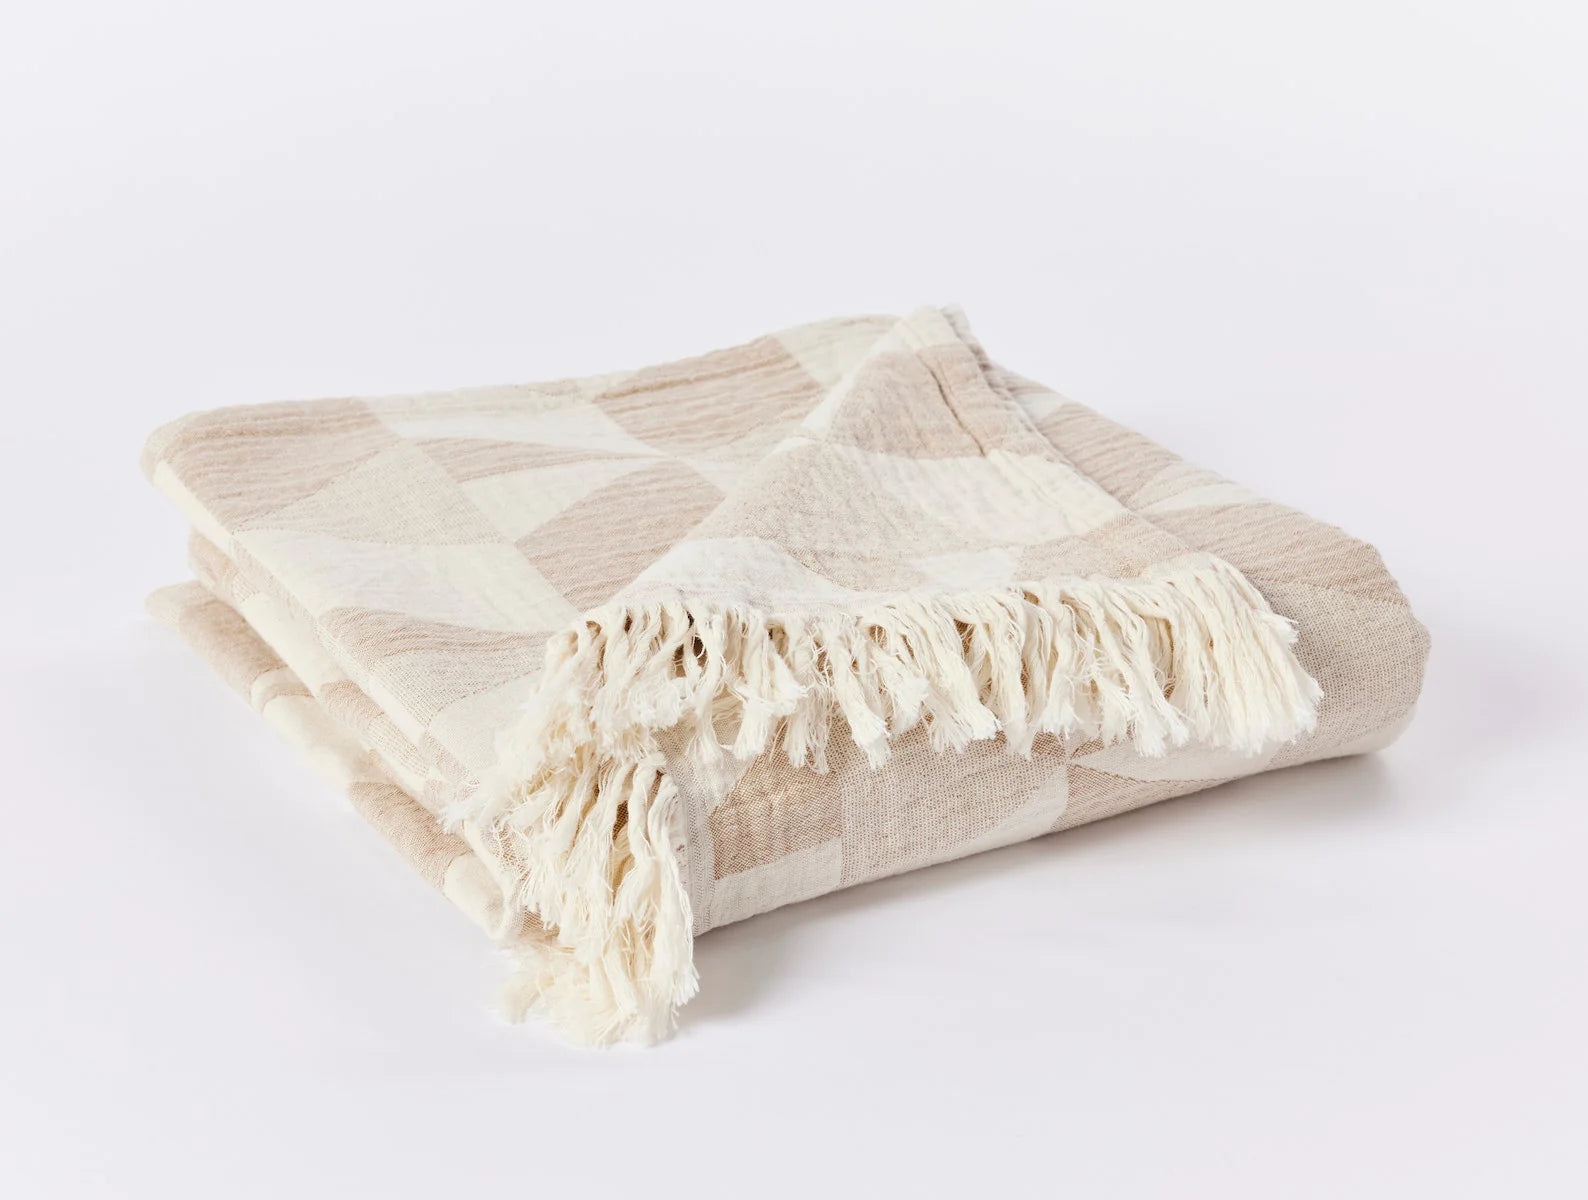 Pismo Organic Cotton Throw in Hazel folded to show off the 2.5" fringe on the top and bottom. Bright, white background.